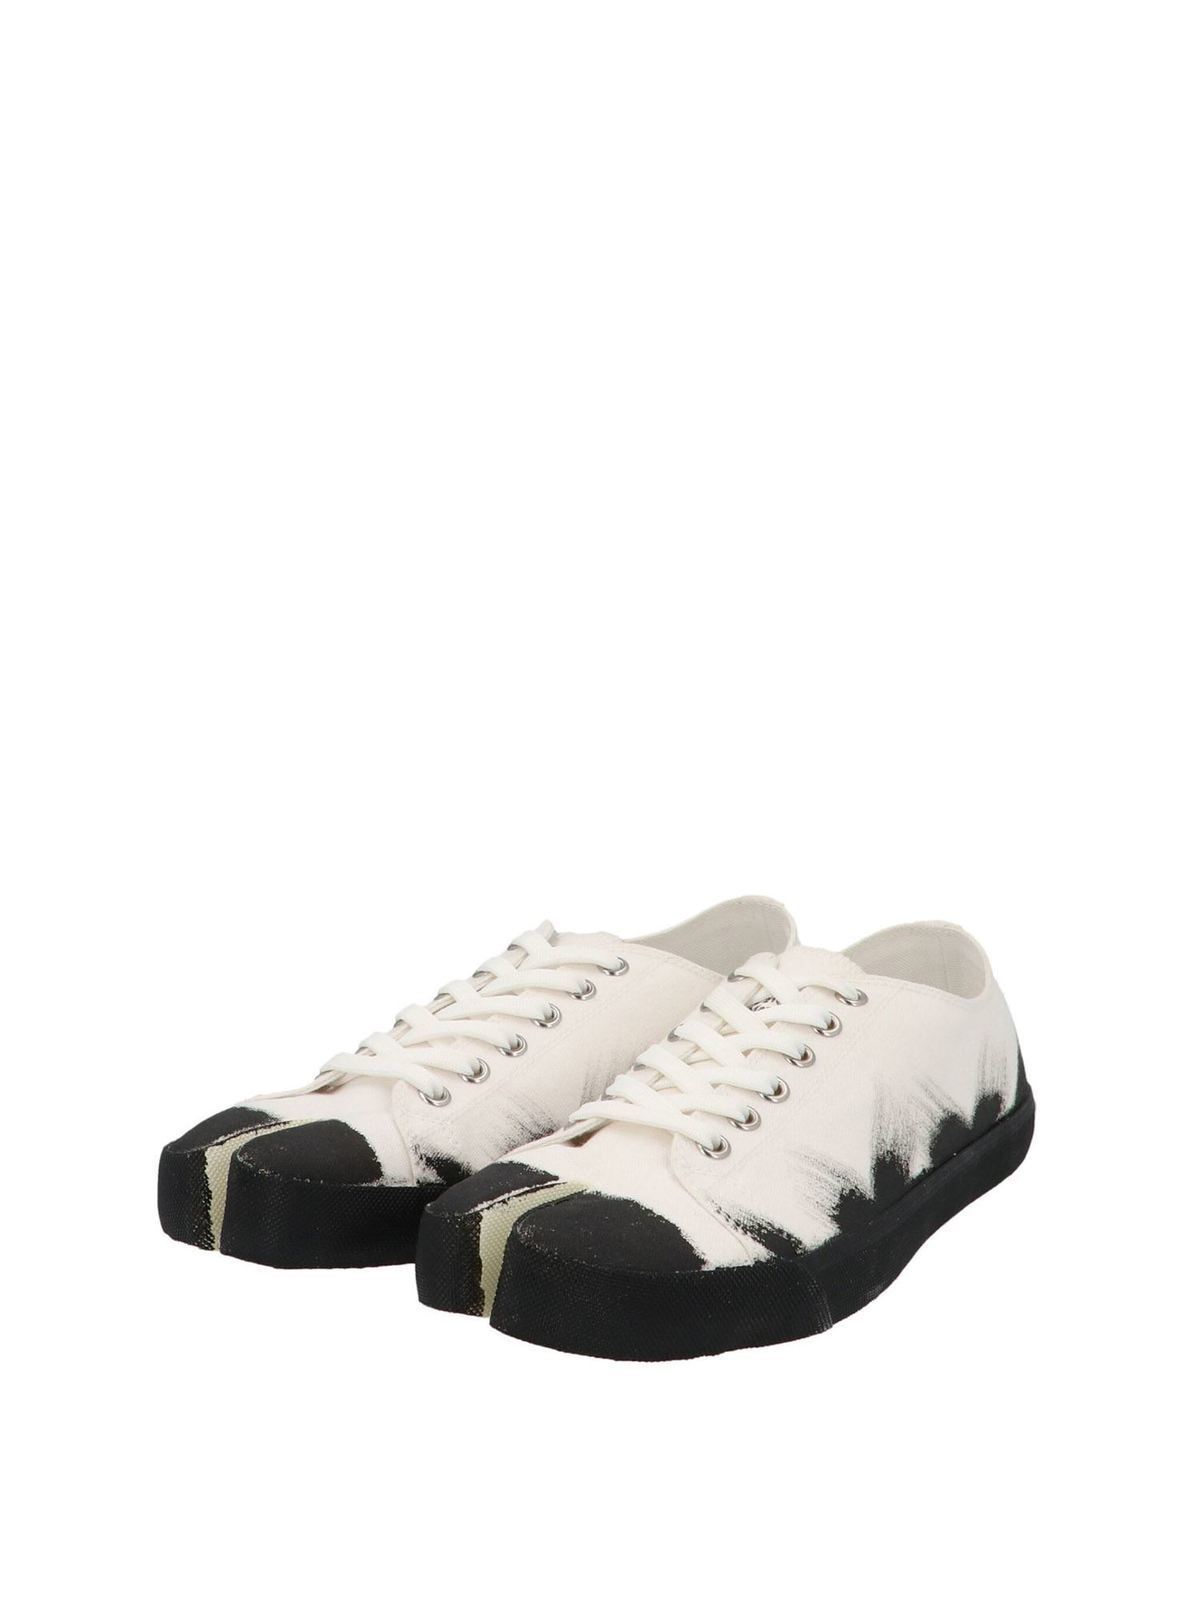 Maison Margiela - Tabi sneakers in white - trainers - S37WS0495P3719H8327